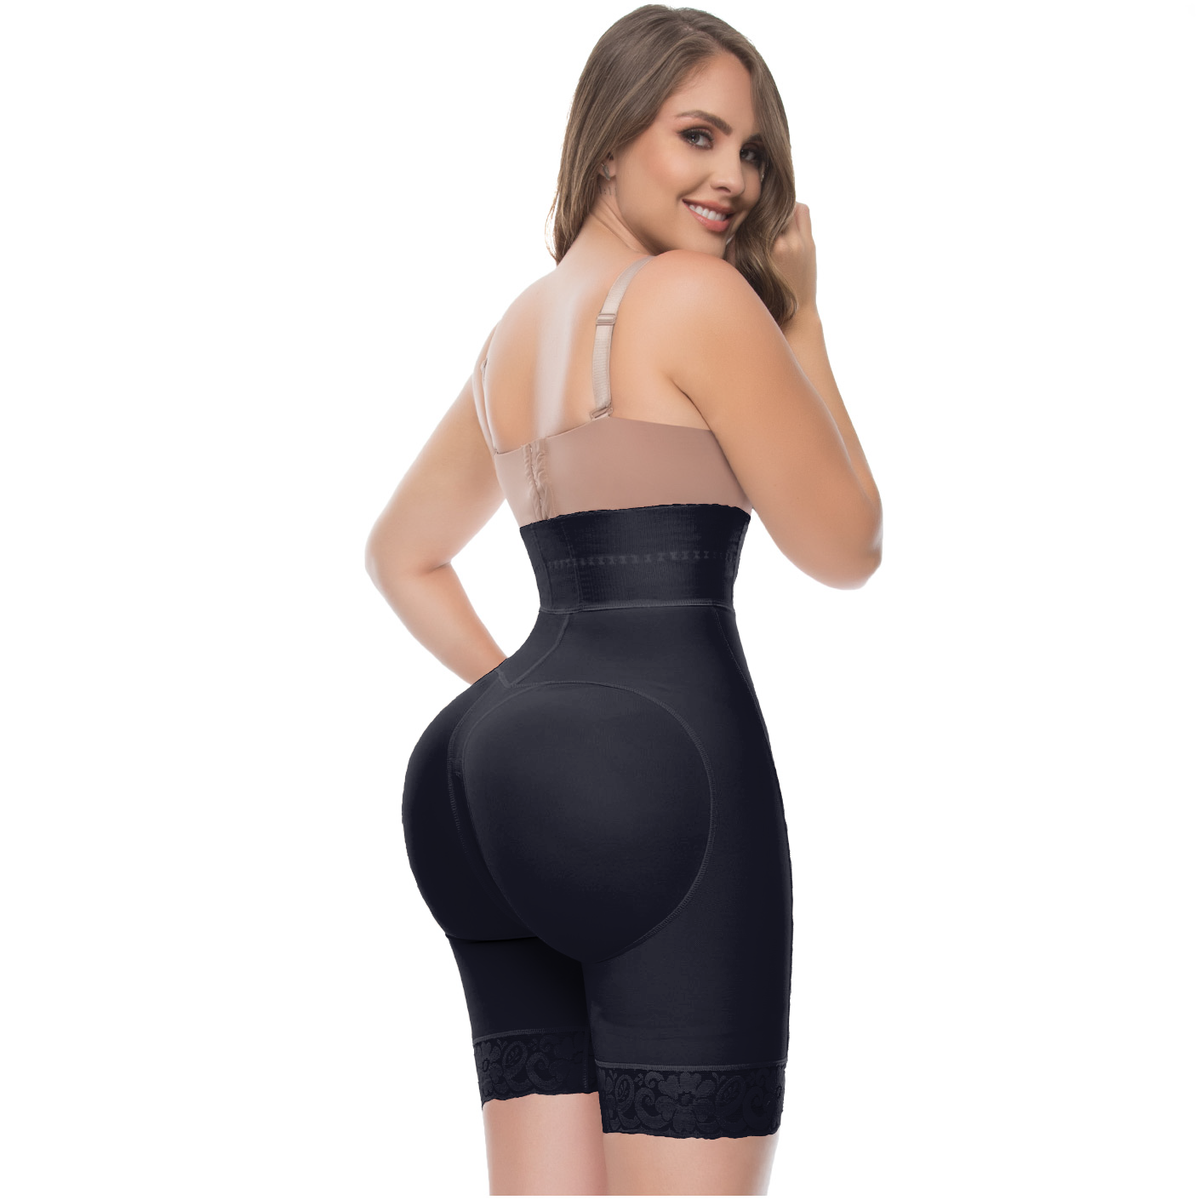 Colombian Melibelt Reducing Girdle Lifts Butt Strapless